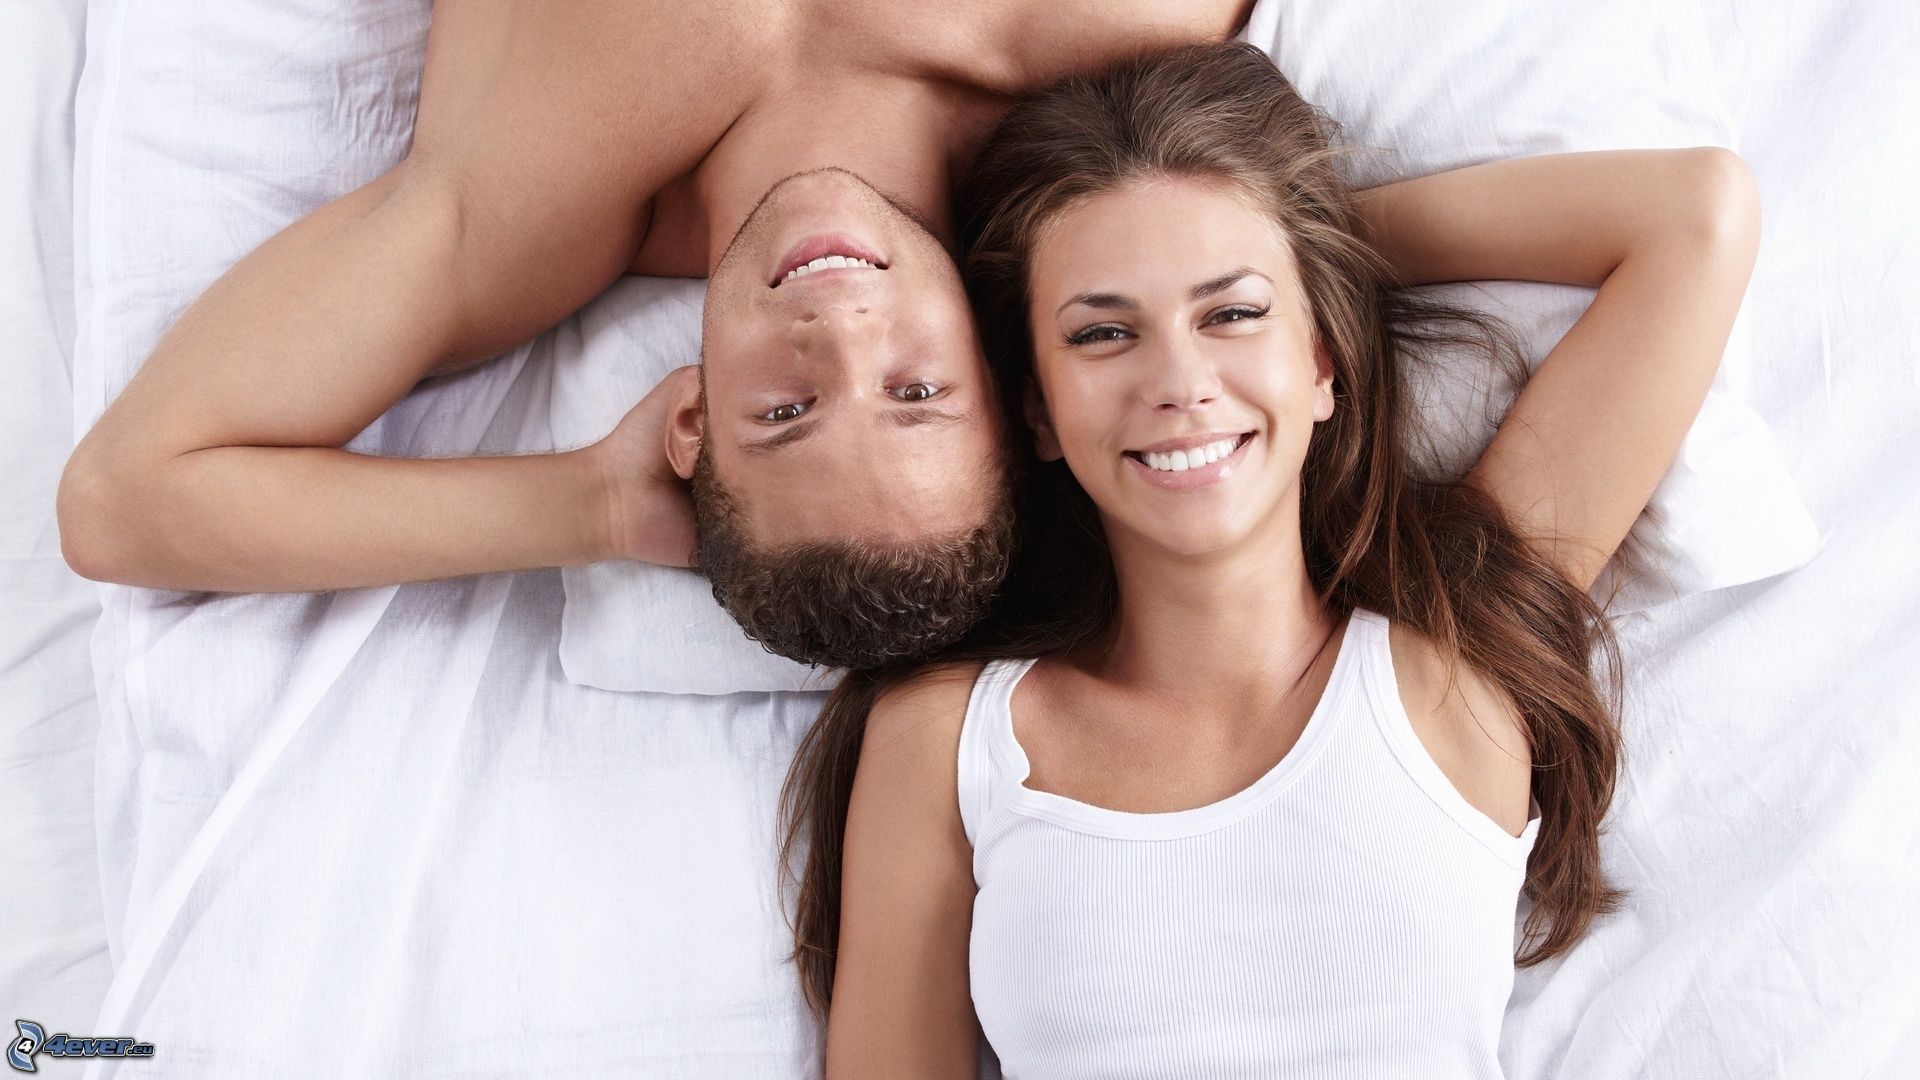 couple-on-bed-159679